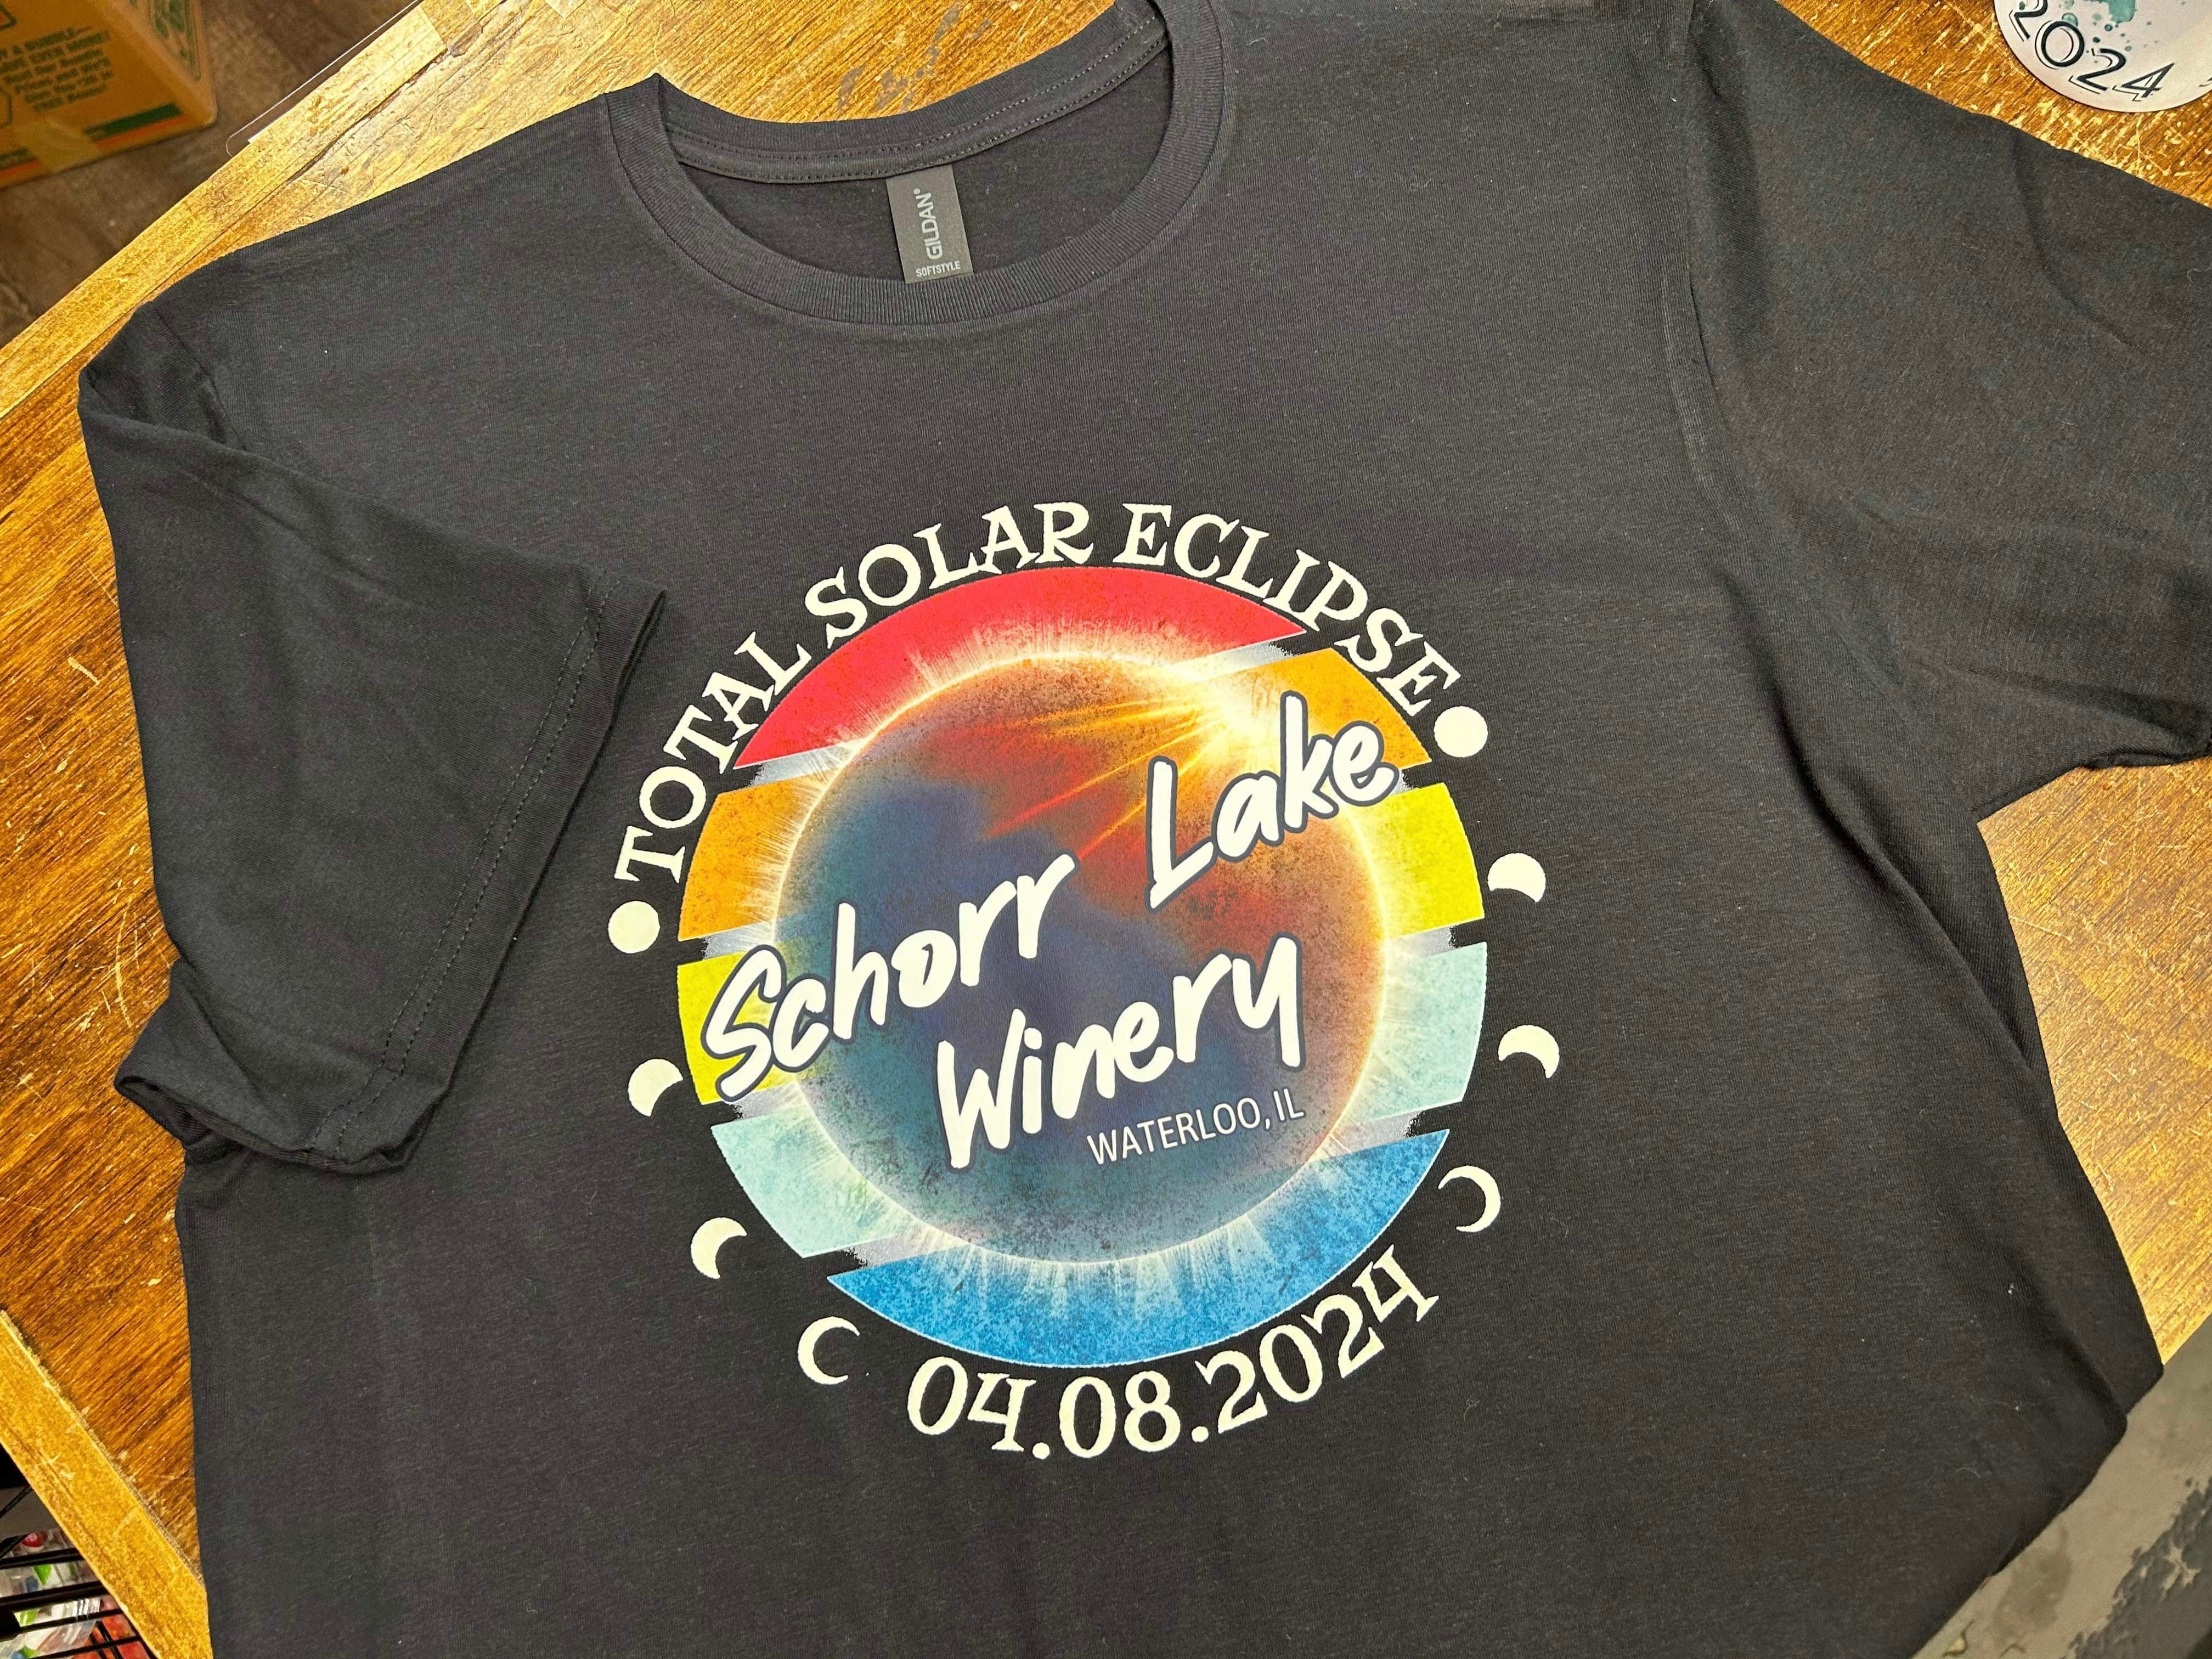 Total Solar Eclipse T-shirt - Schorr Lake Winery - Waterloo, IL